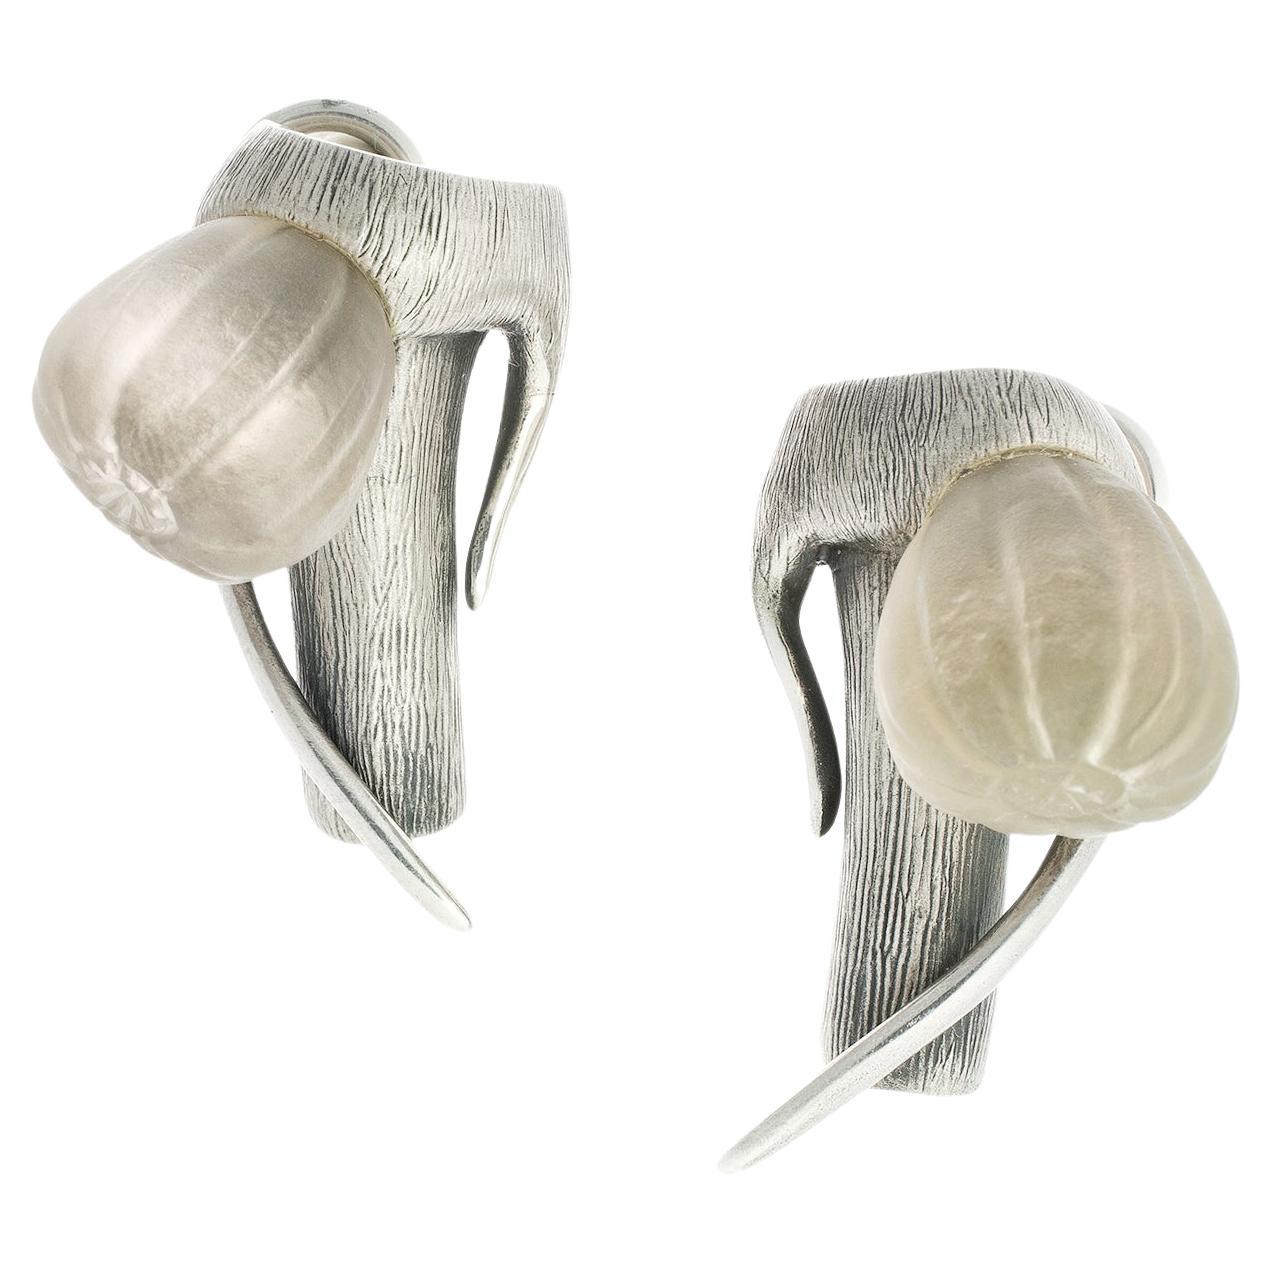 Fig Garden Stud Earrings in Silver with Quartzes by the Artist For Sale